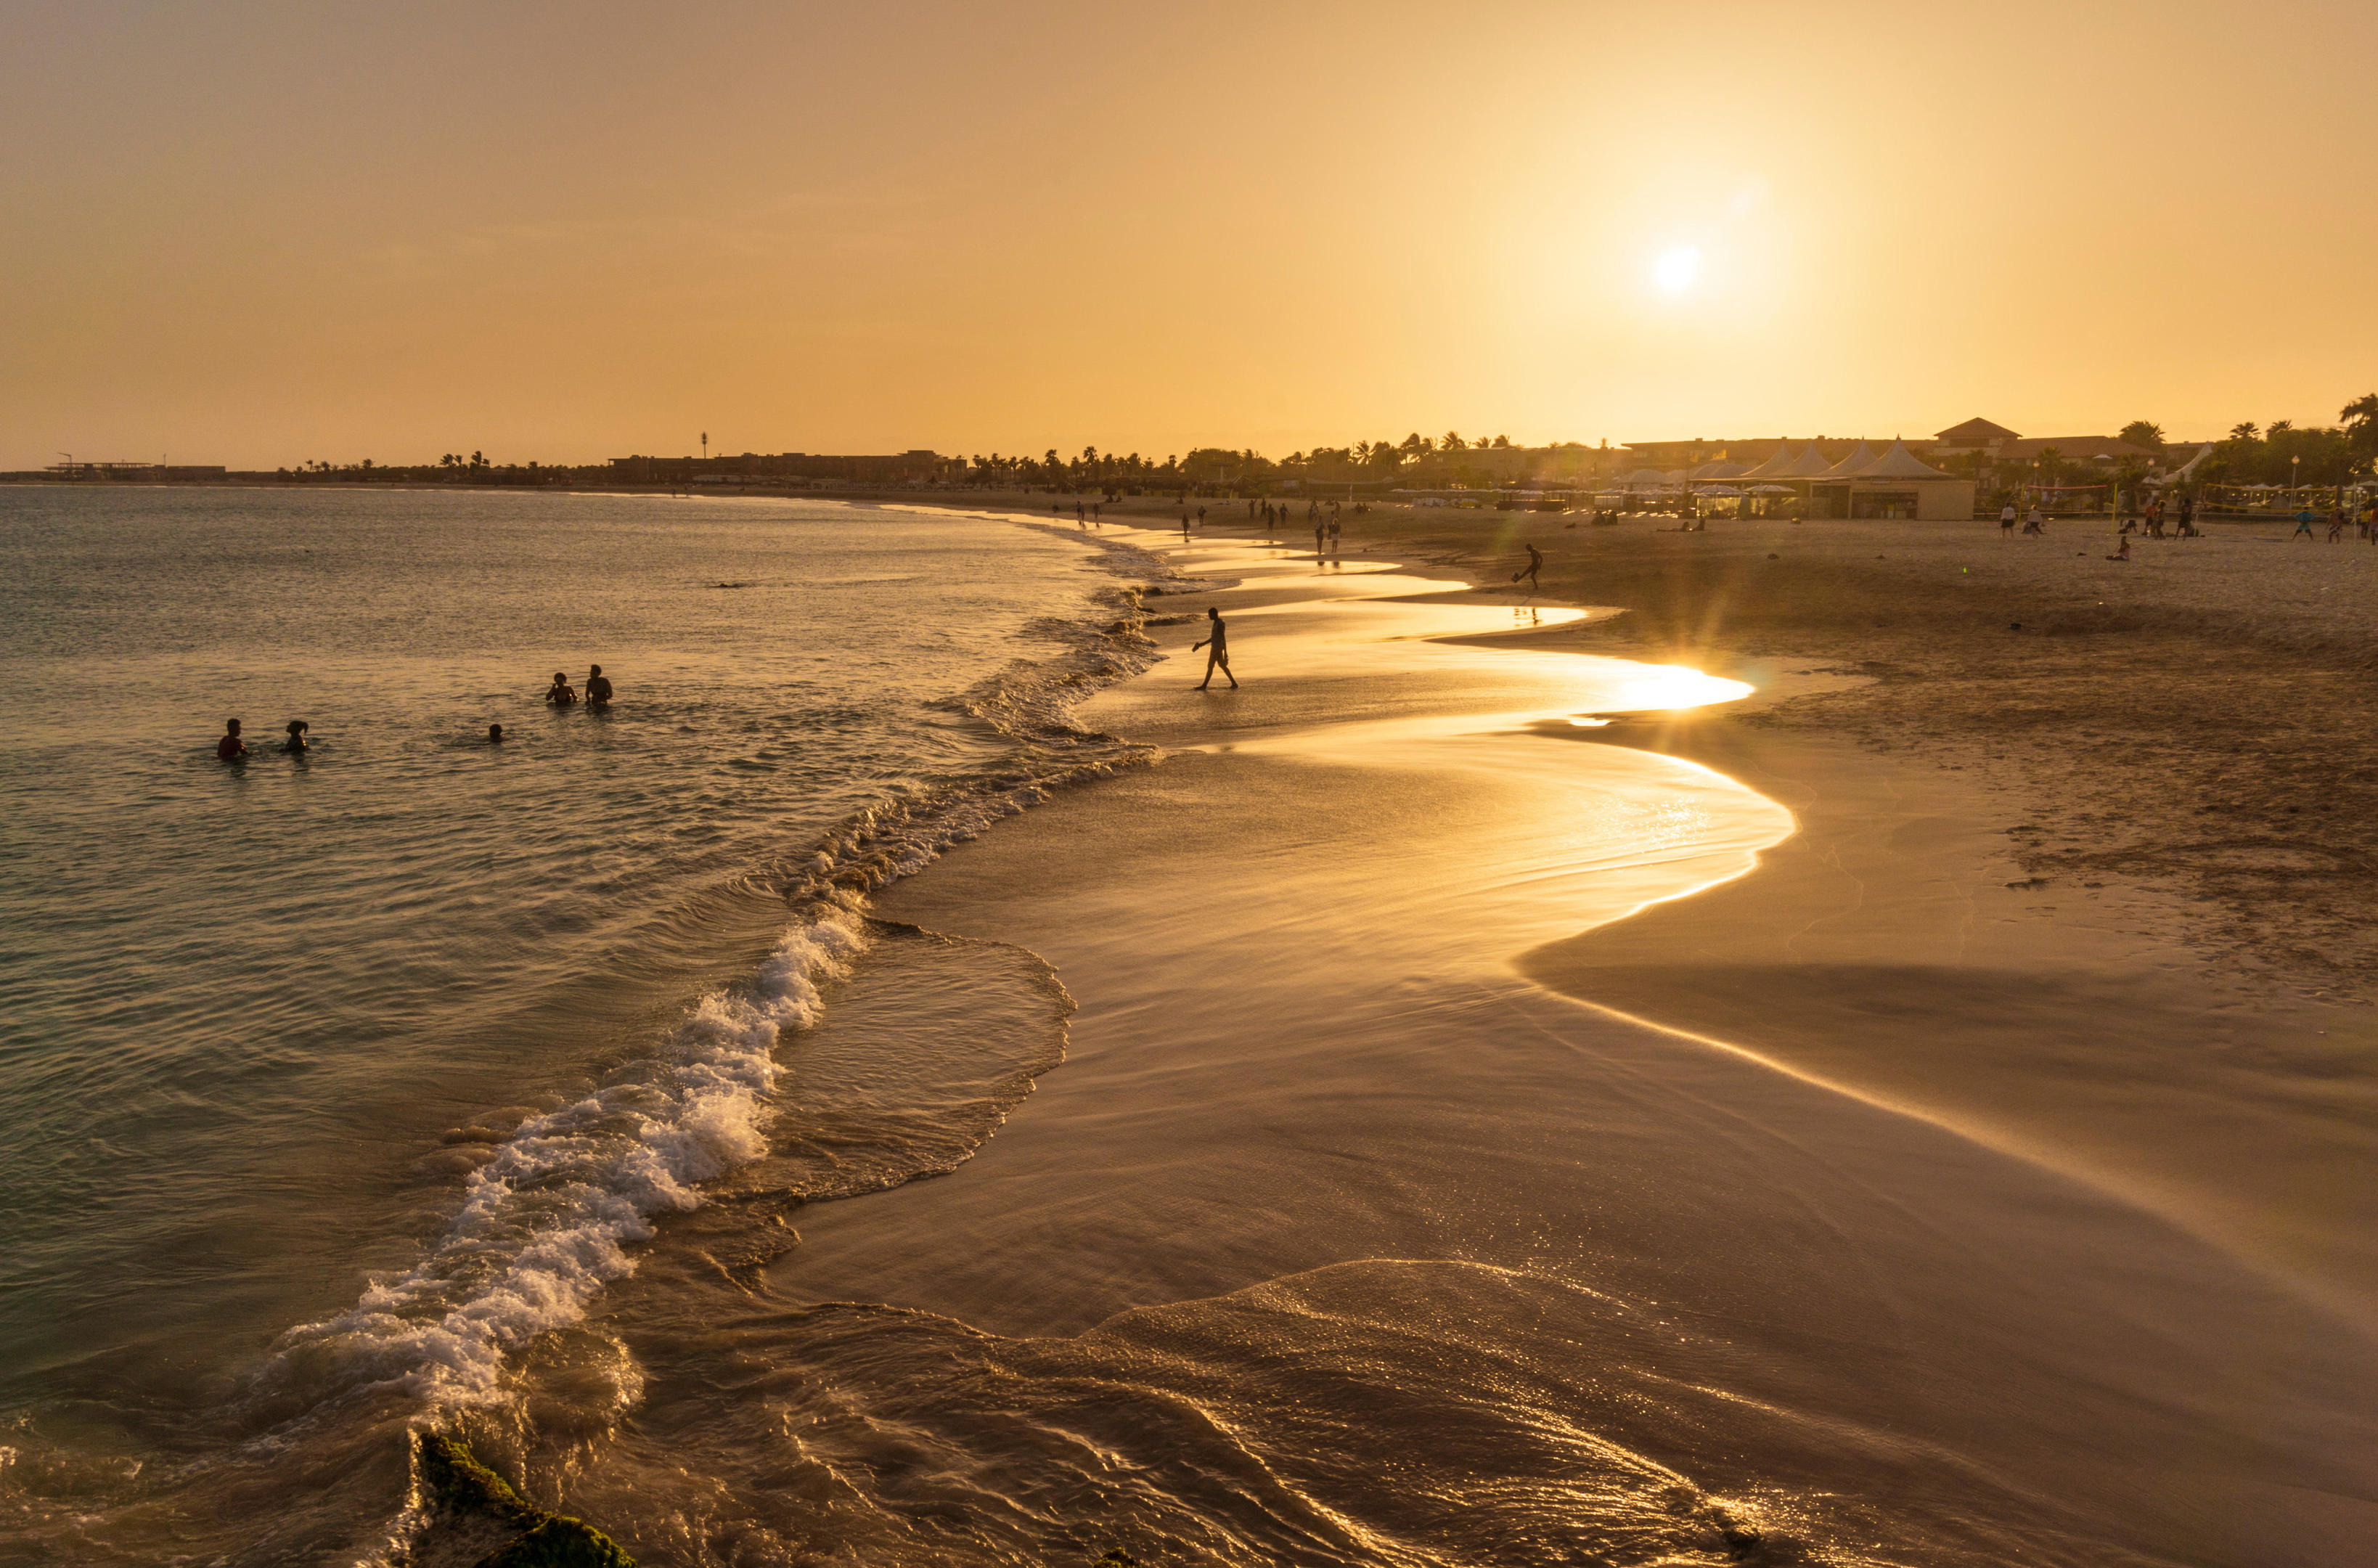 Sunset at the beach in Santa Maria (Alamy)